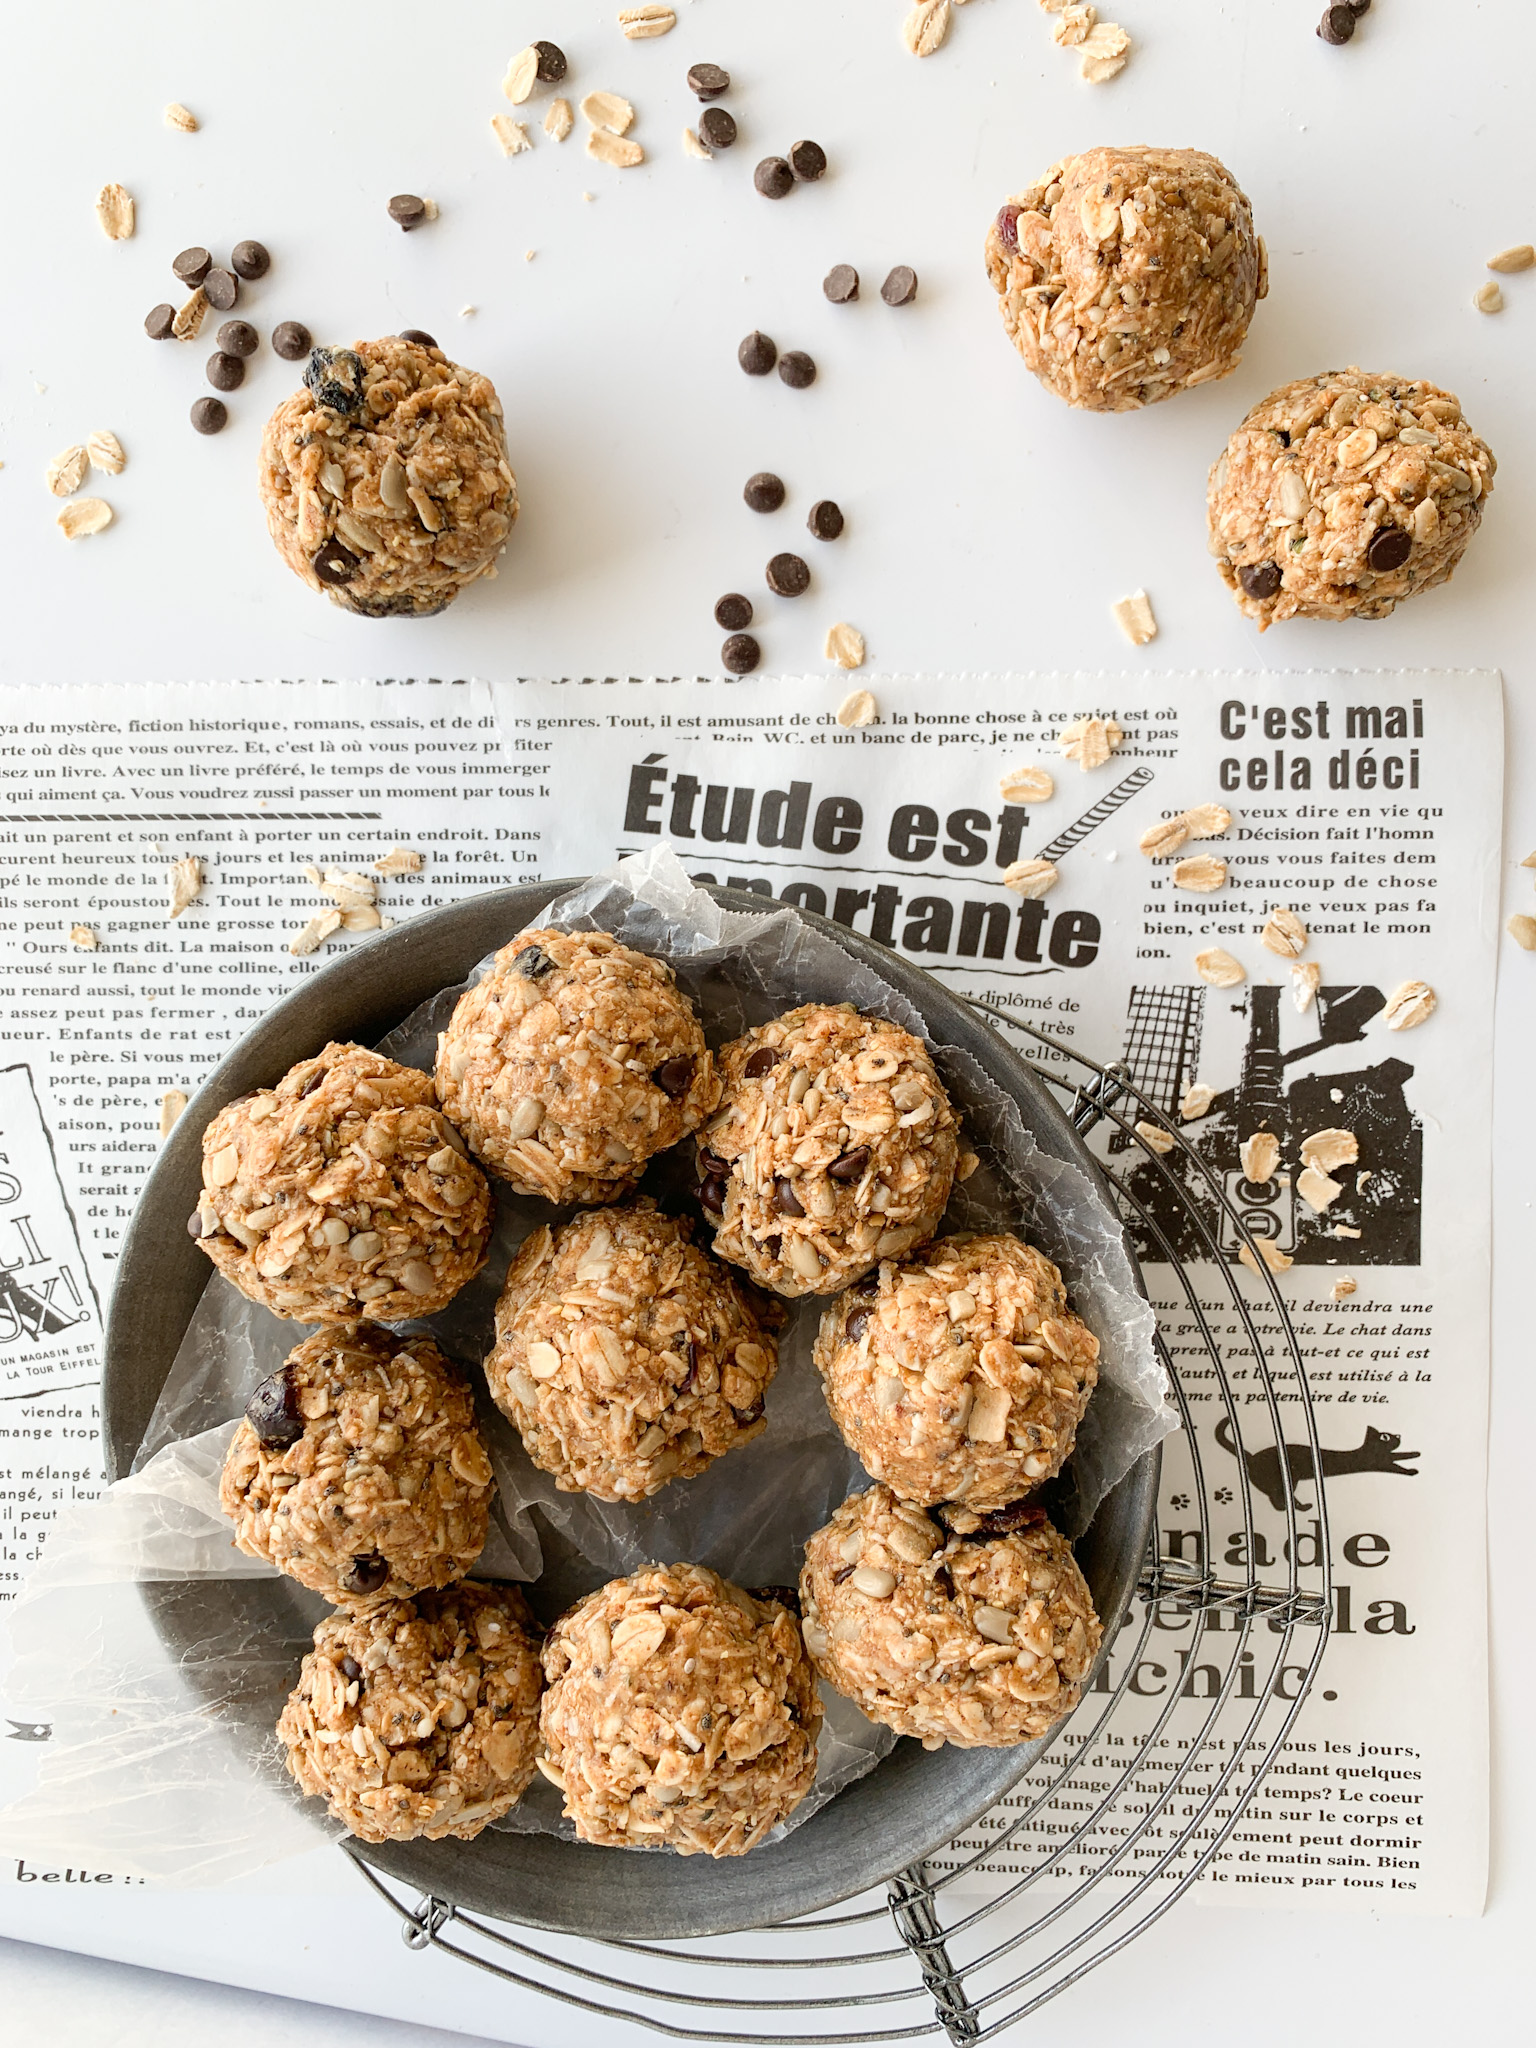 Gluten-free no bake nut and seed balls that are portable, healthy and simply delicious.